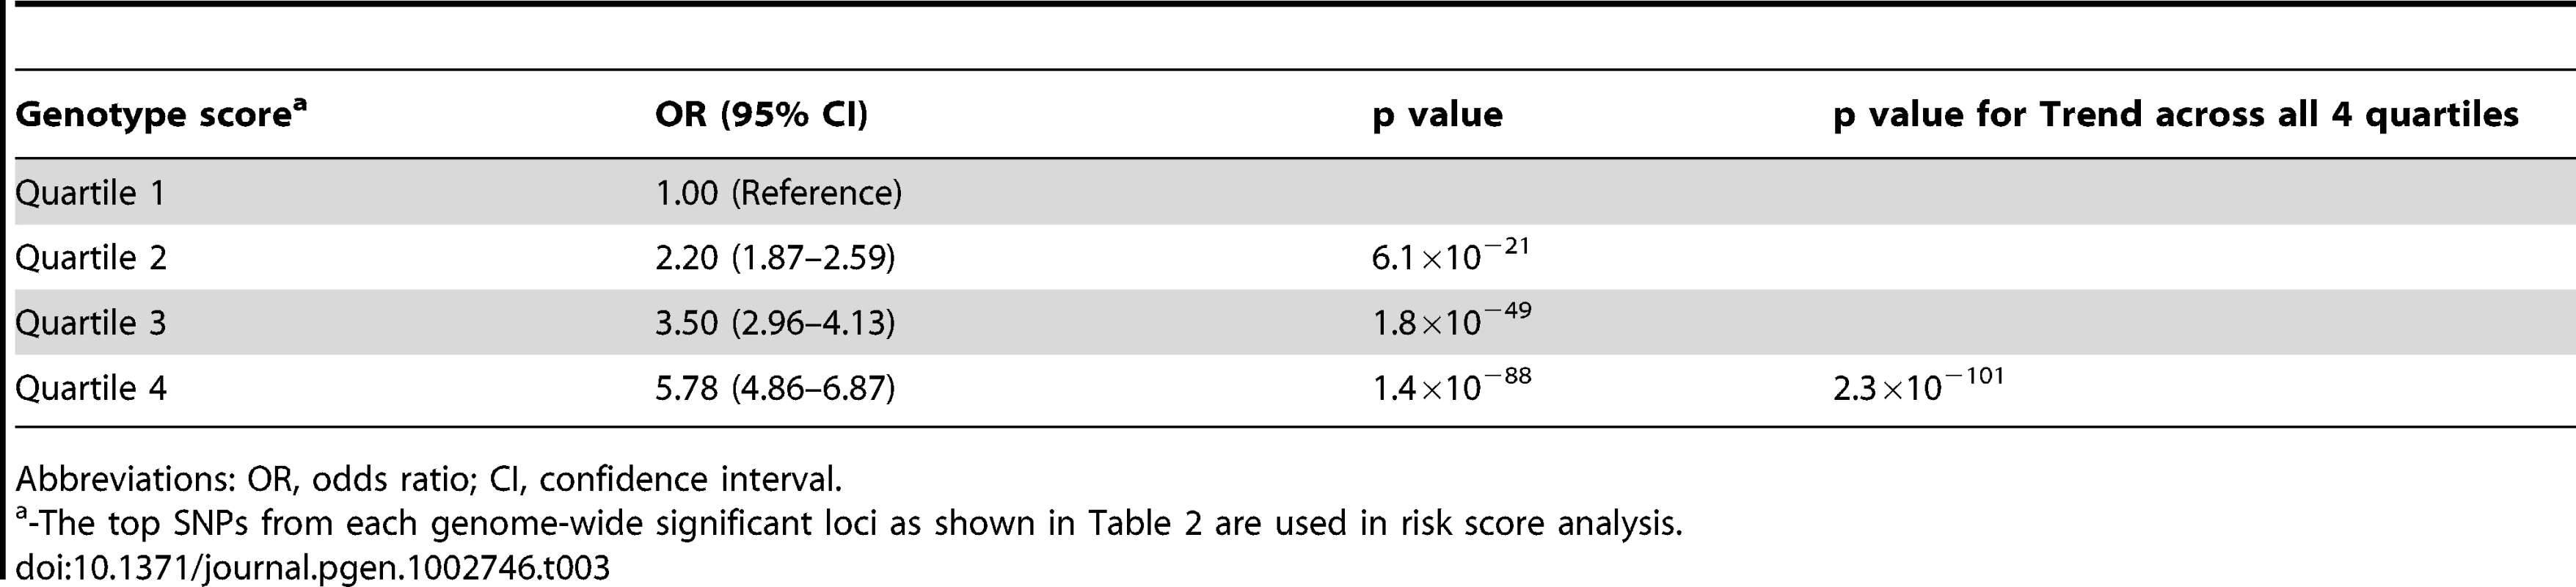 Genotype score associated with the risk of androgenetic alopecia.